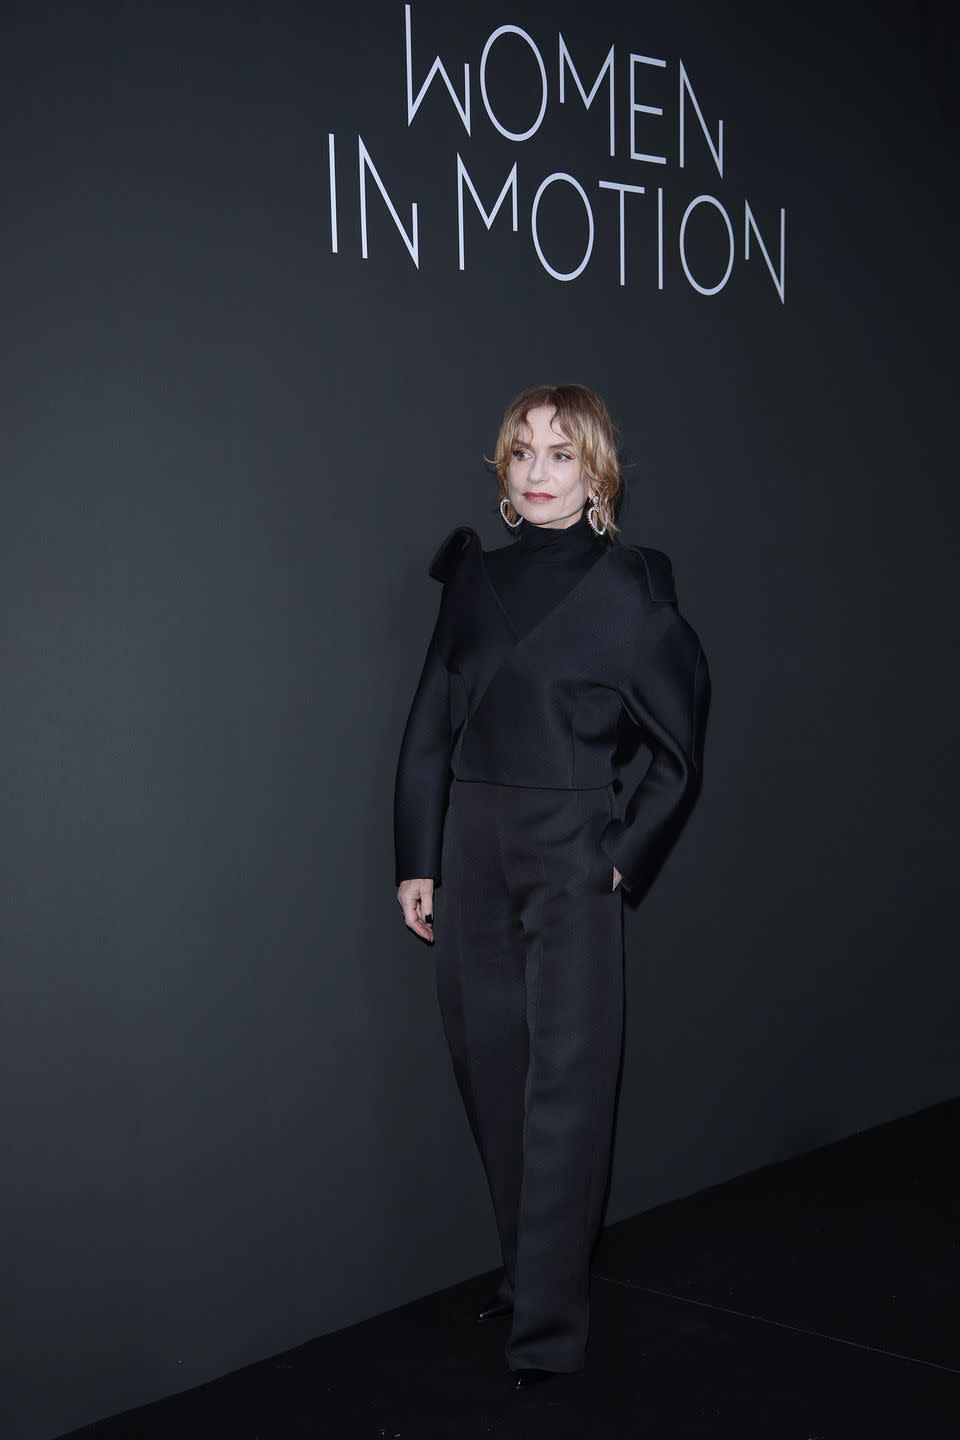 cannes, france may 21 enter caption here attends the kering women in motion awards during the kering and cannes film festival official dinner on may 21, 2023 in cannes, france photo by daniele venturelligetty images for kering